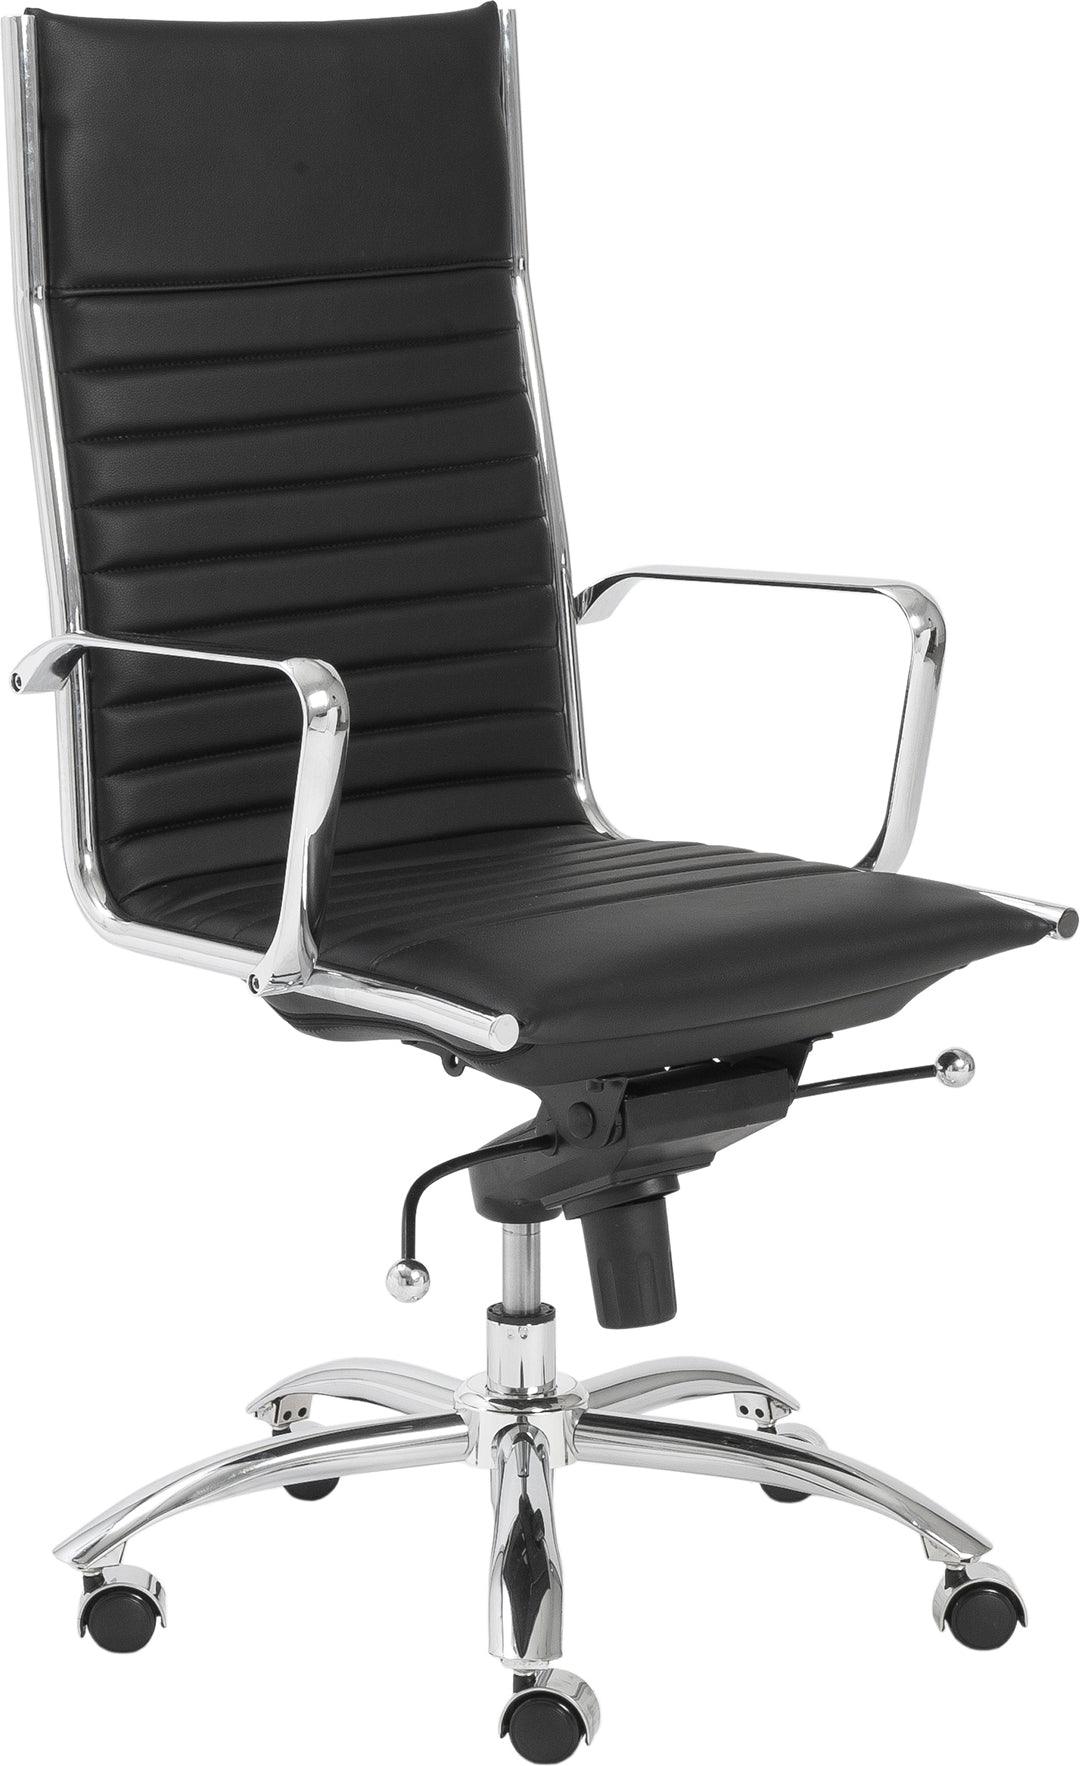 Euro Style Task Chairs - Dirk High Back Office Chair Black